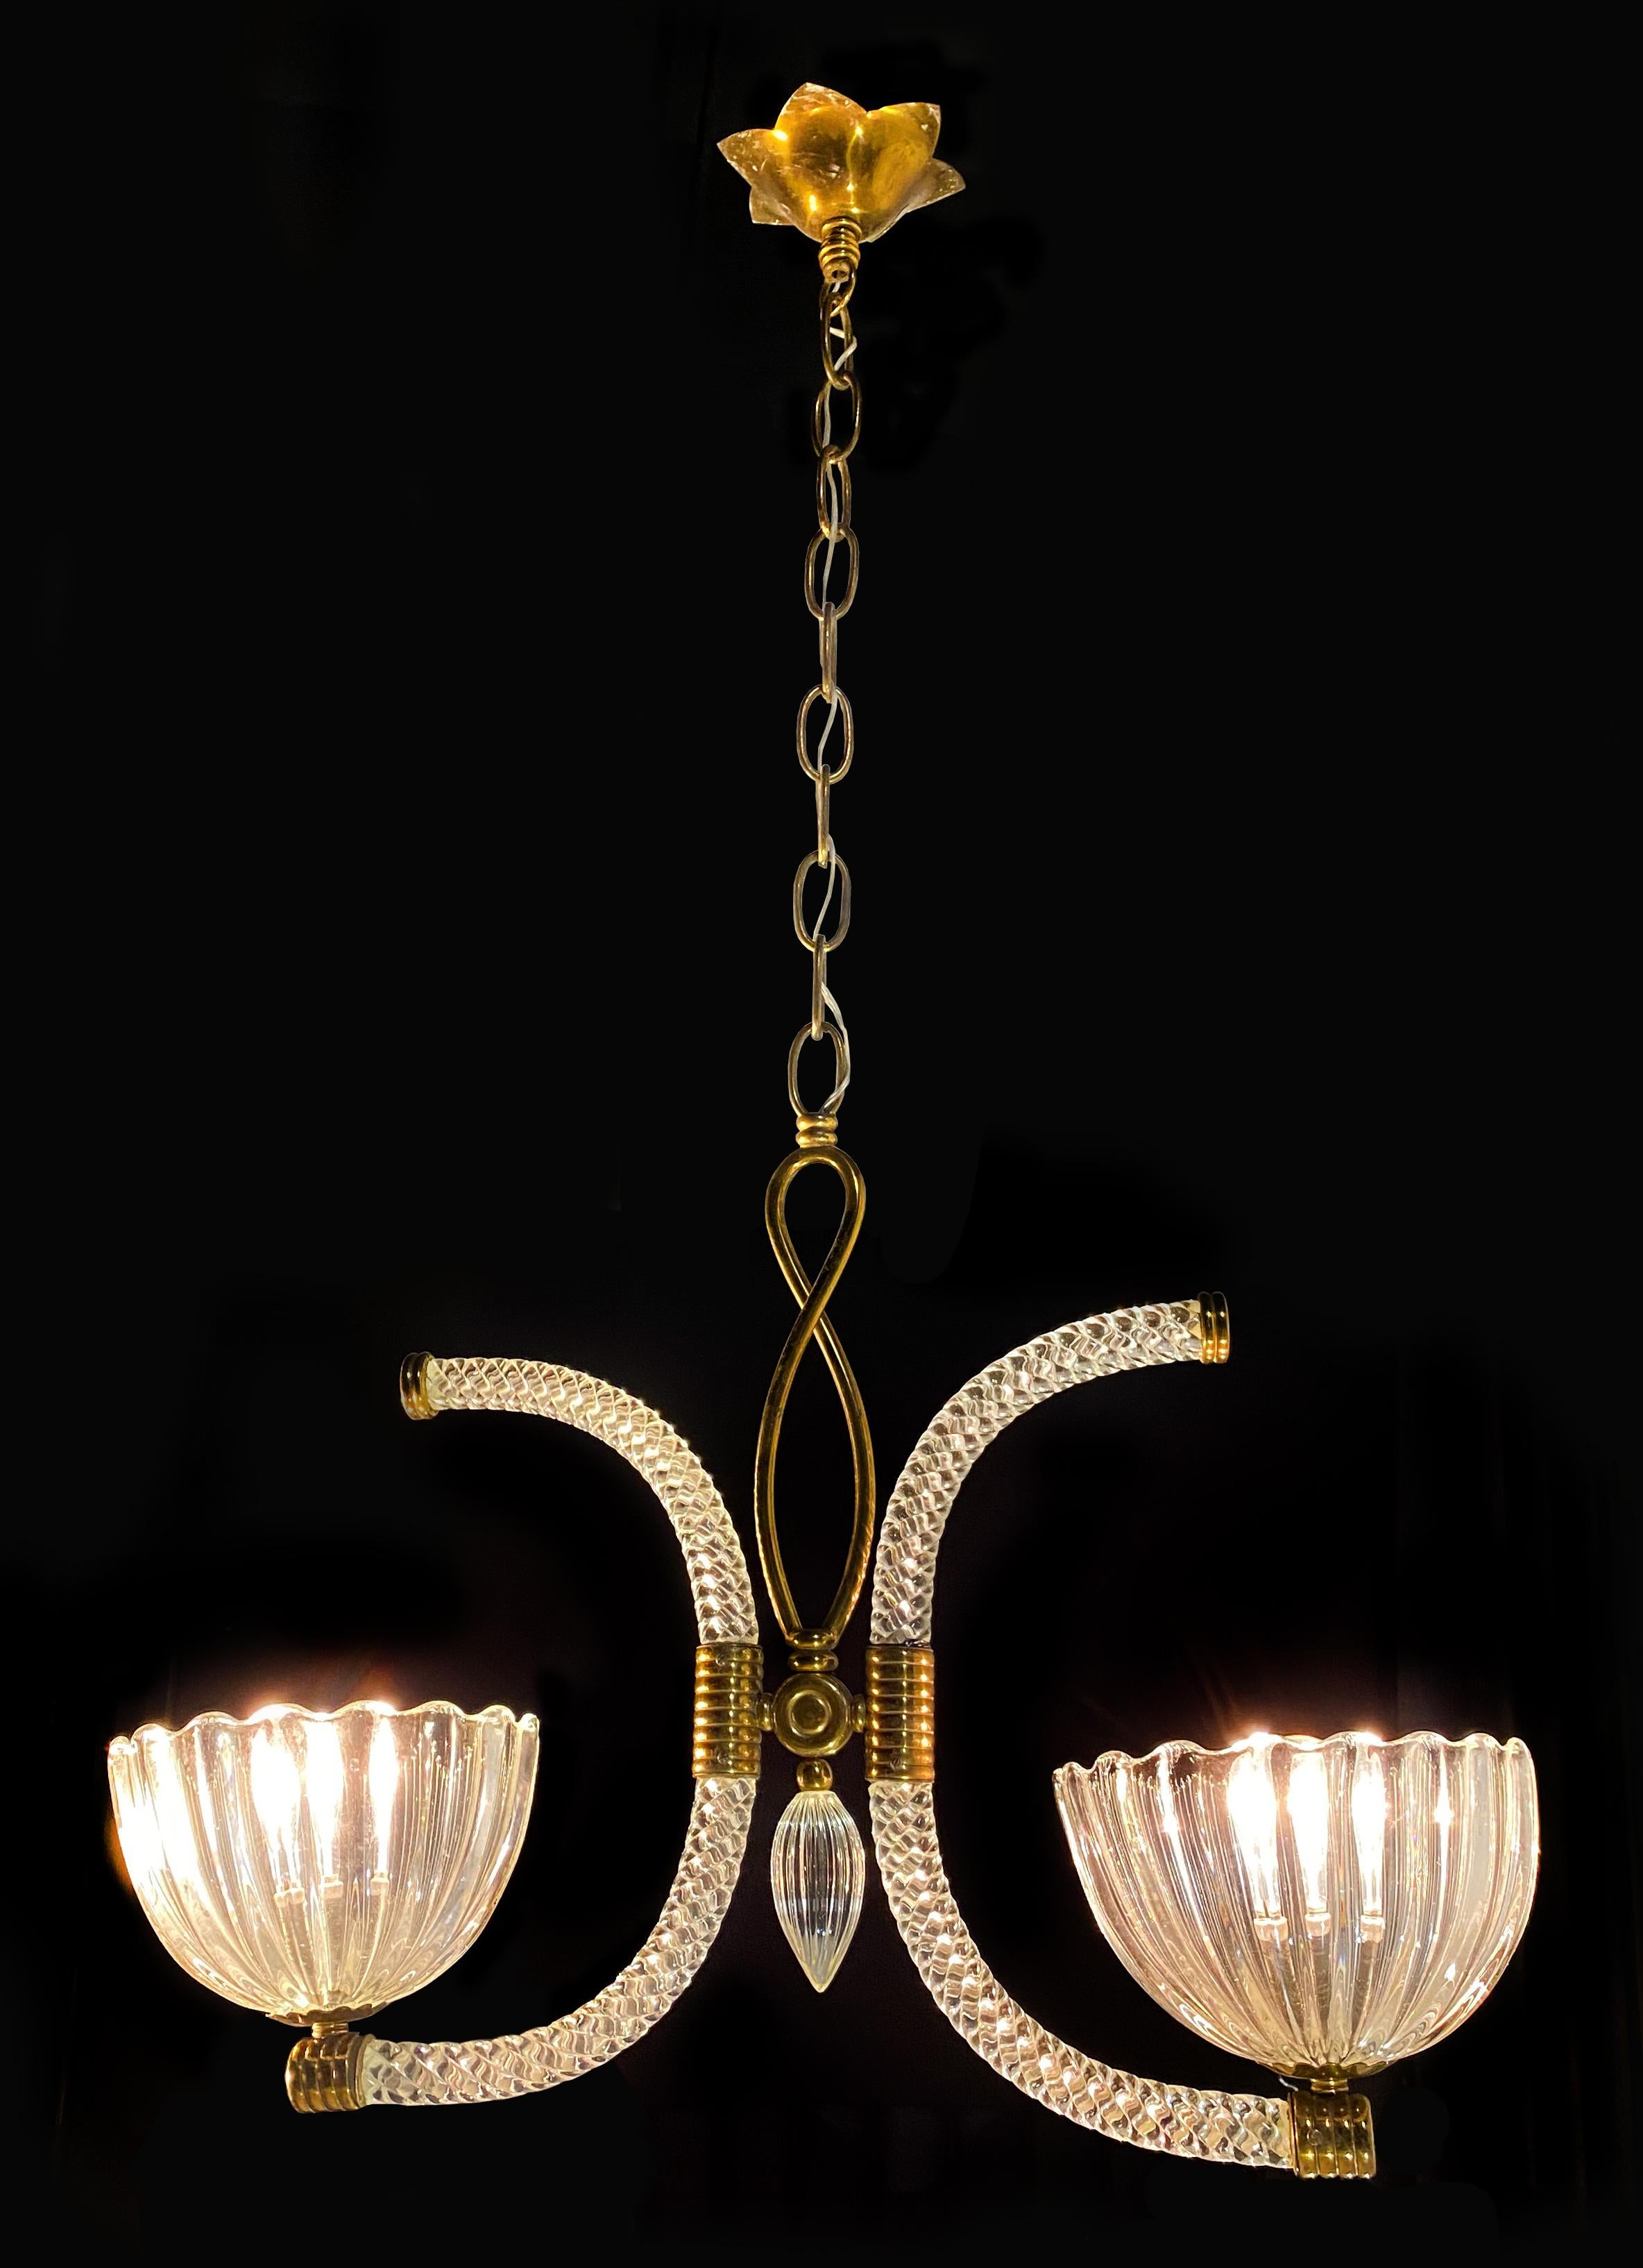 Wonderful and rare Art Deco chandelier by Ercole Barovier, 1940s. Two powerful arms worked 